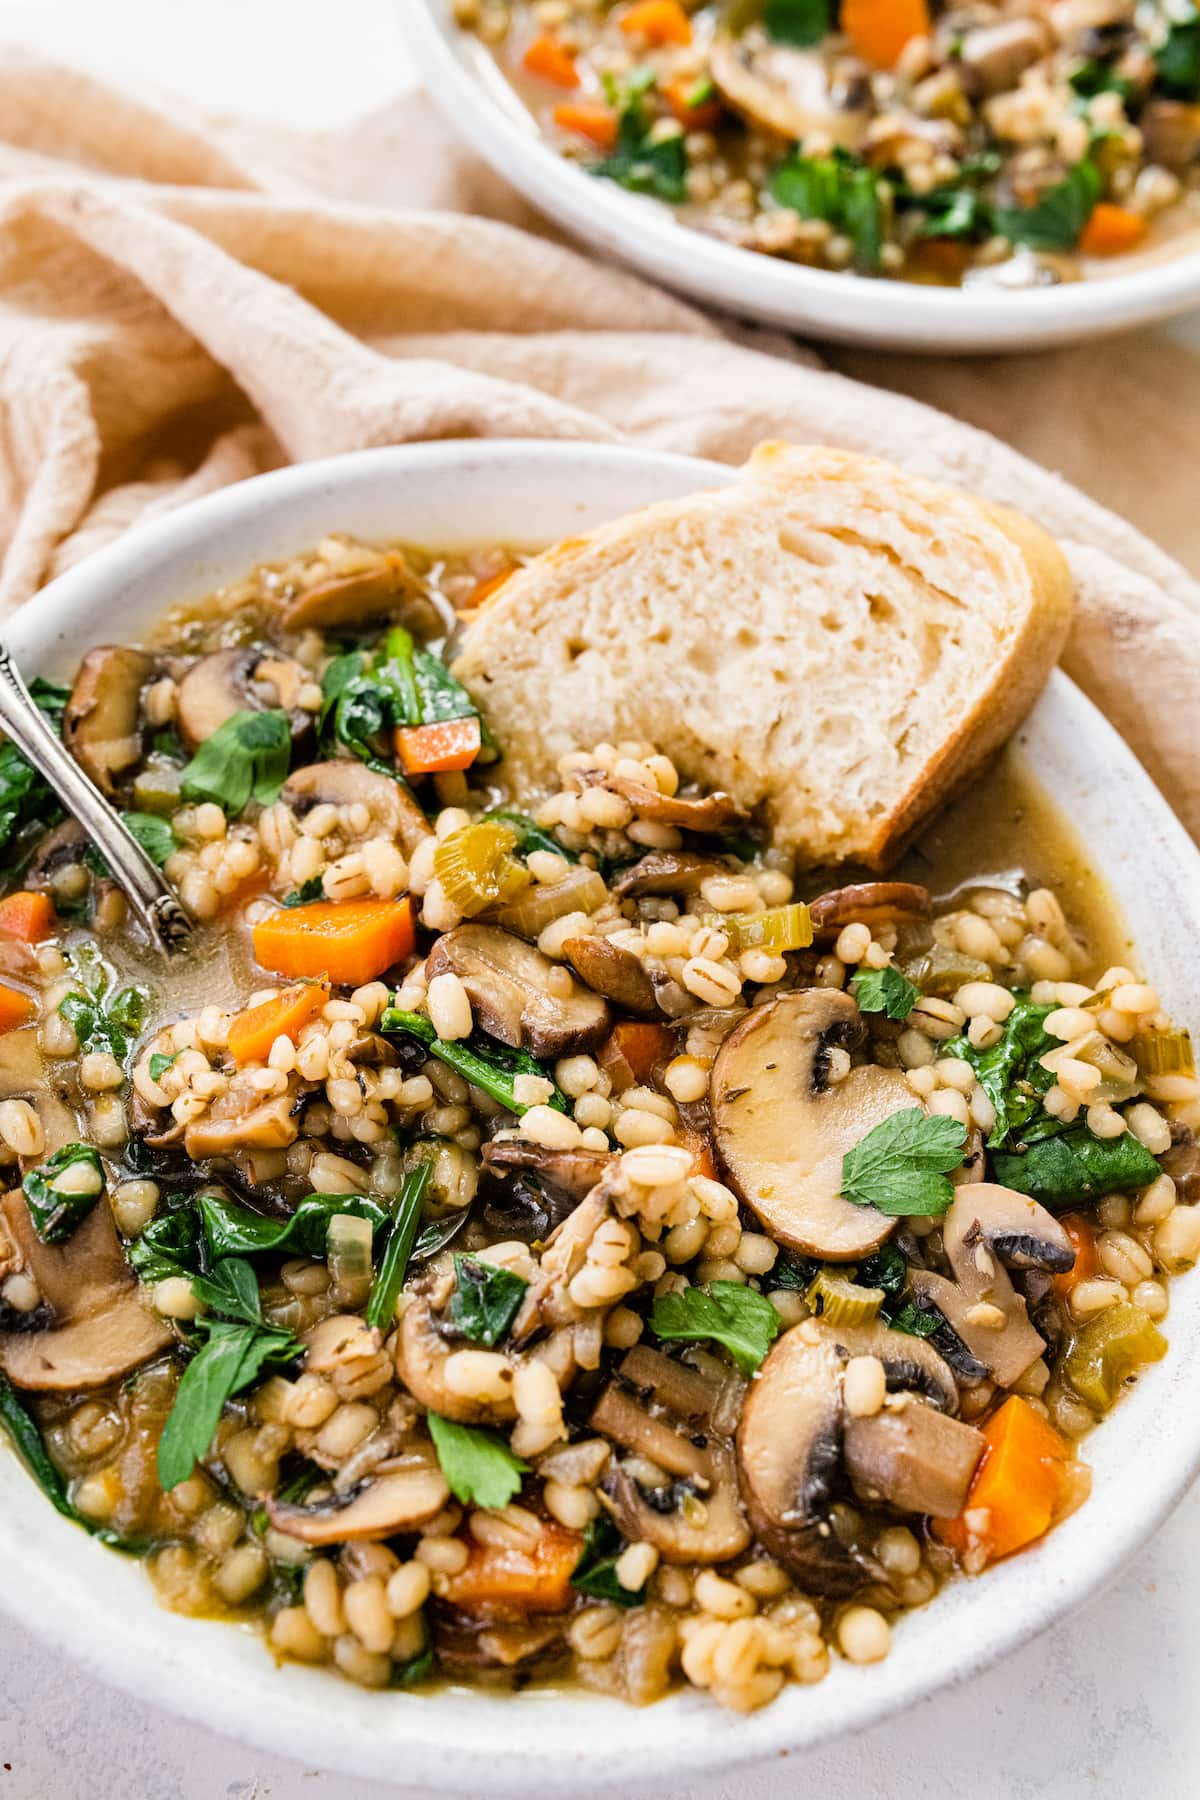 Mushroom barley soup in a bowl with bread.